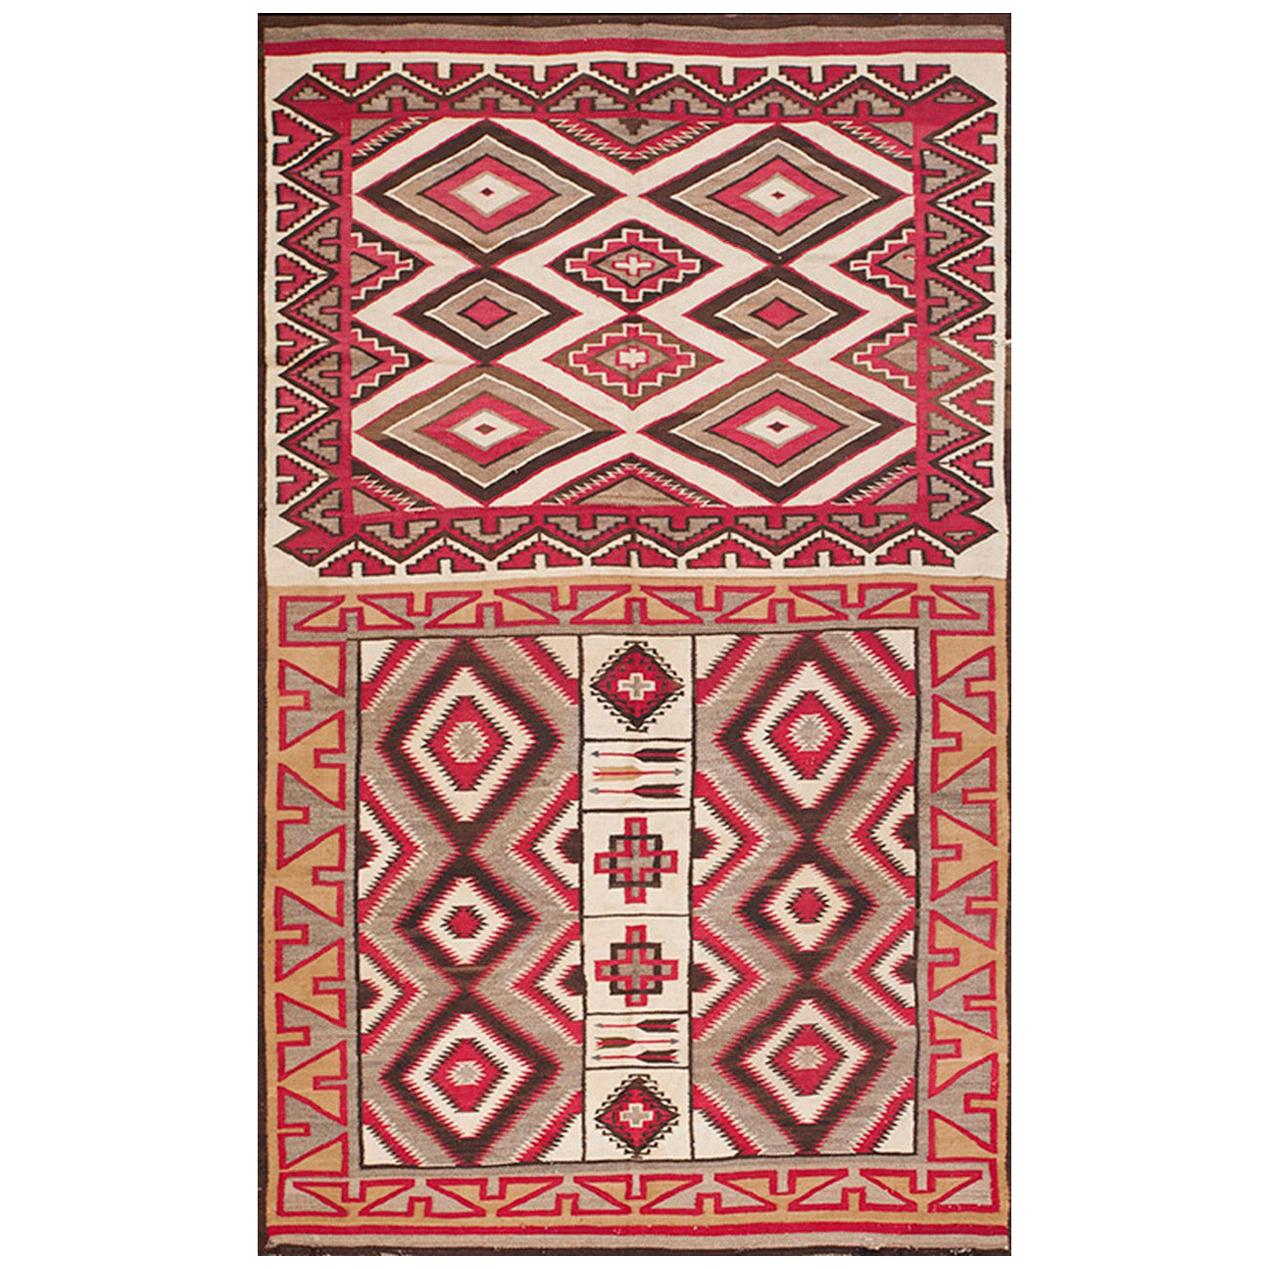 Early 20th Century American Navajo Carpet ( 4'9" x 7'6" - 145 x 230 ) For Sale